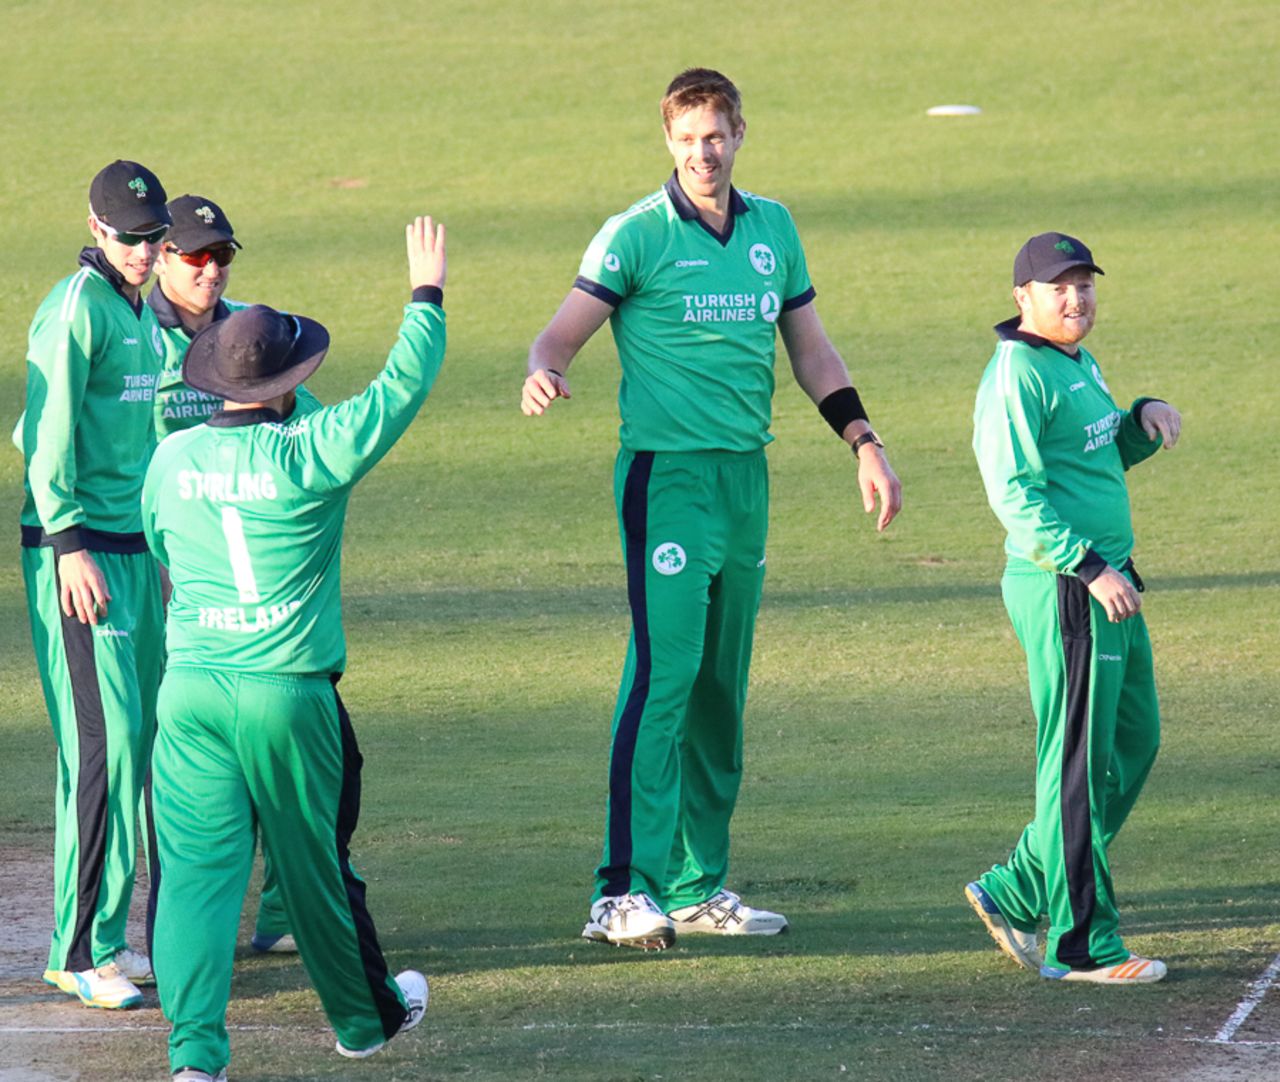 Boyd Rankin gets a high five from Paul Stirling after taking his third wicket, Afghanistan v Ireland, 1st ODI, Sharjah, December 5, 2017